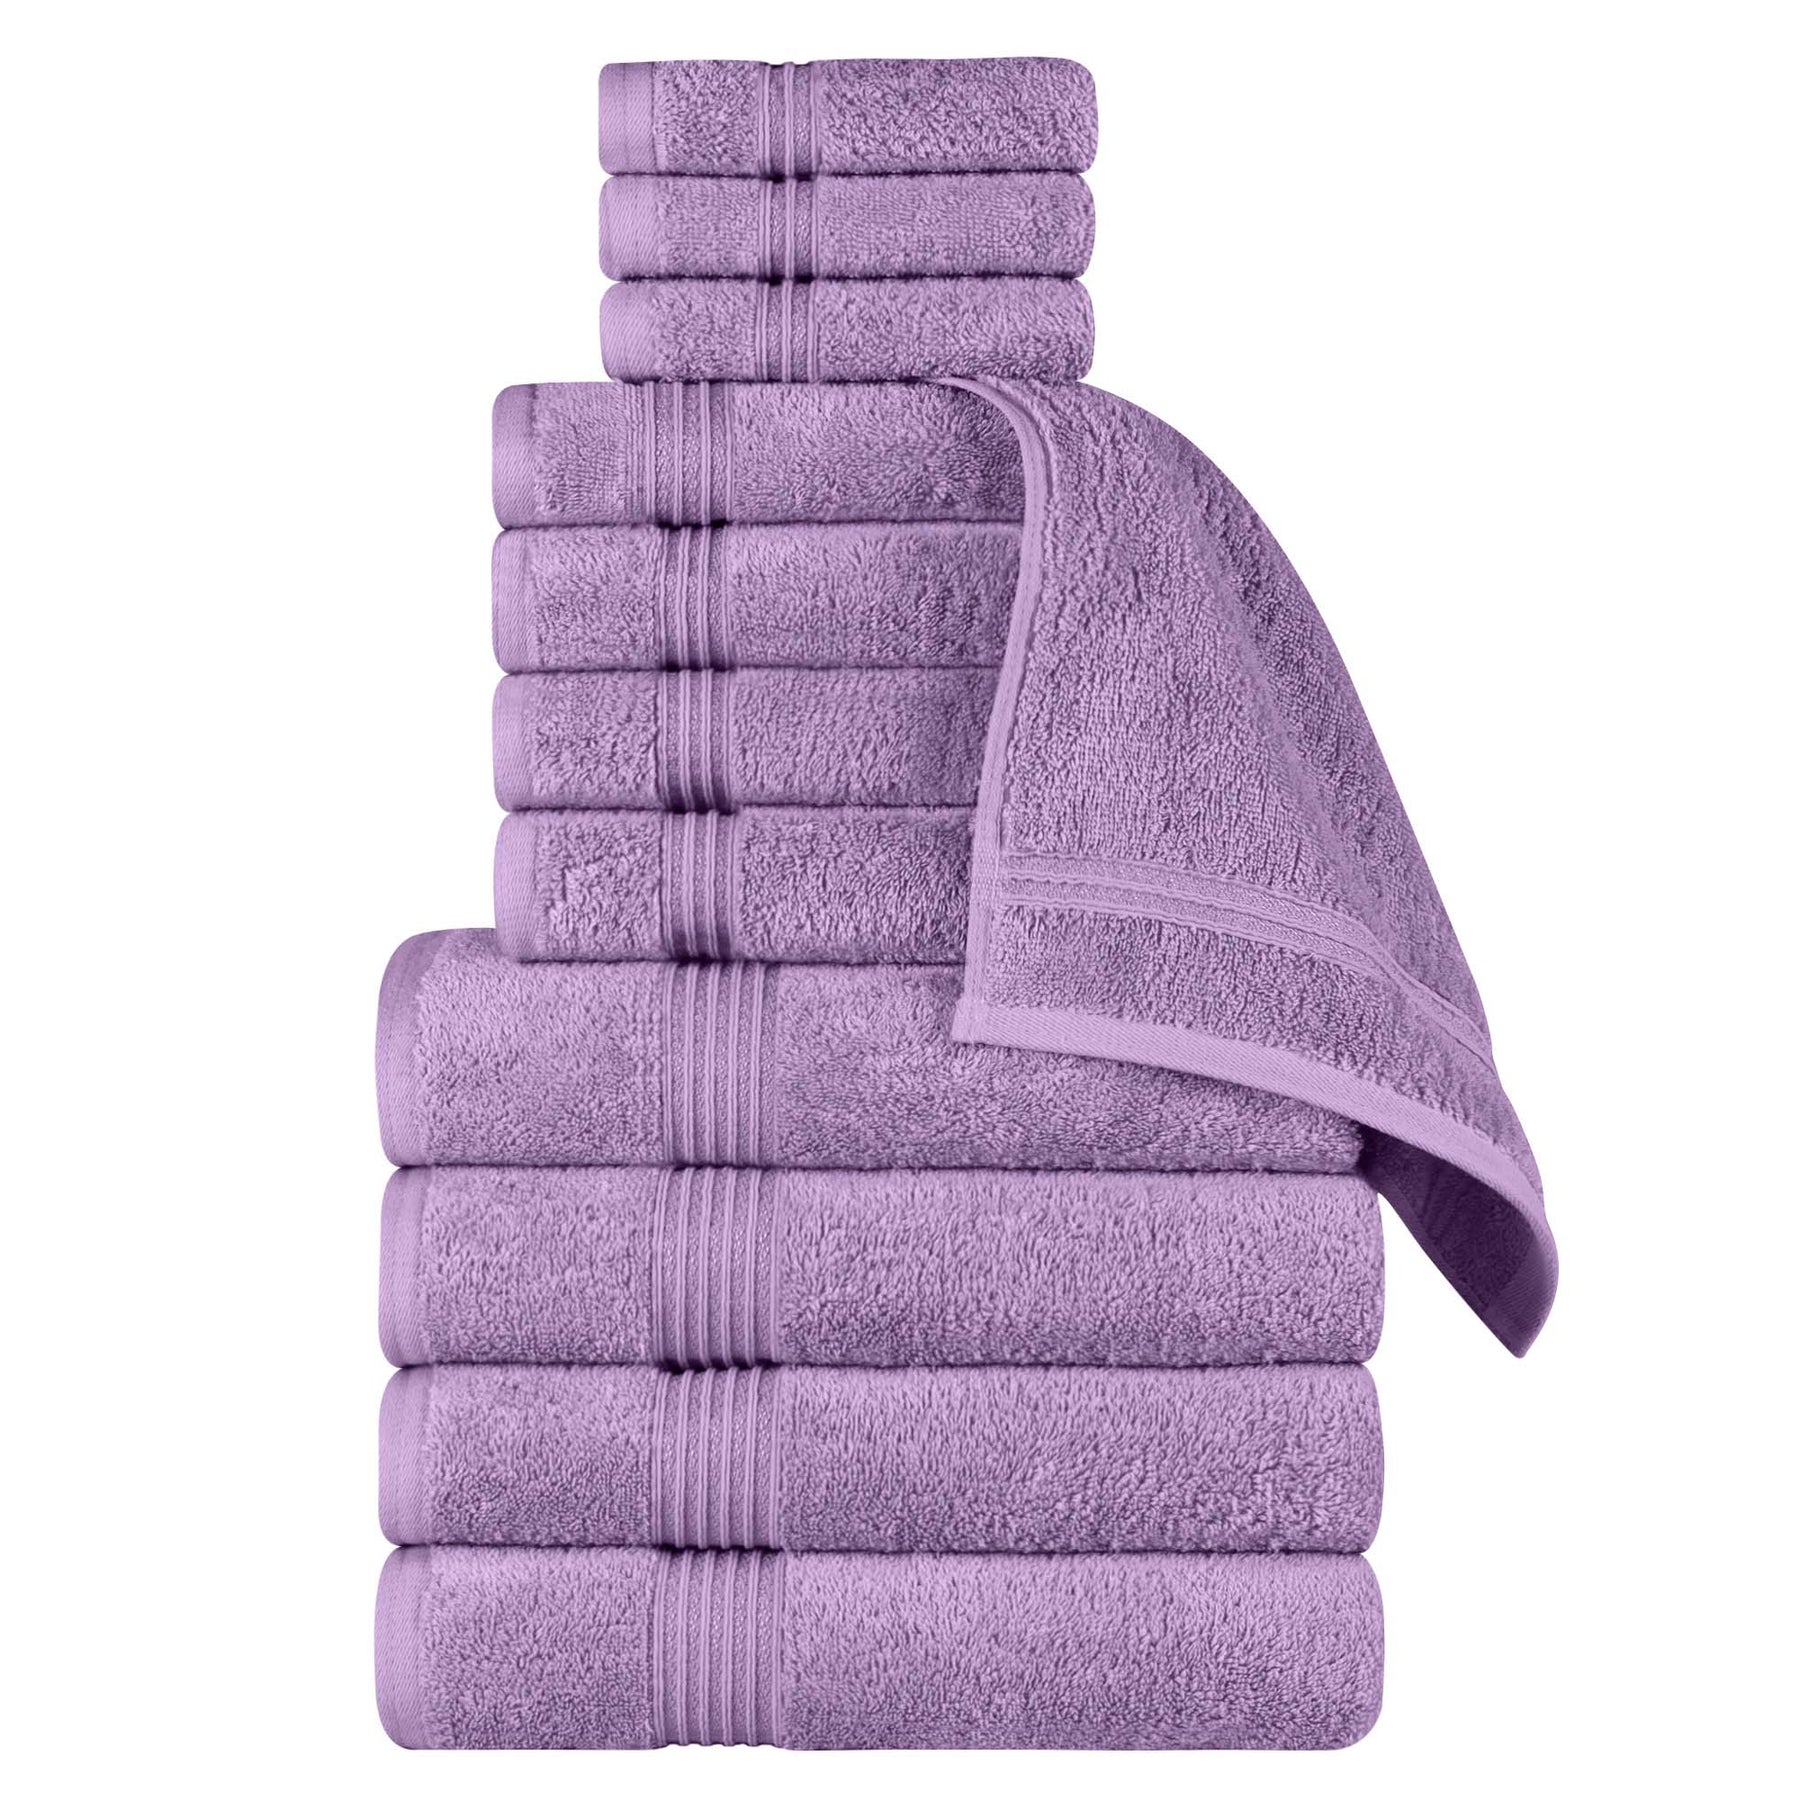 Egyptian Cotton Highly Absorbent Solid 12 Piece Ultra Soft Towel Set - Royal Purple